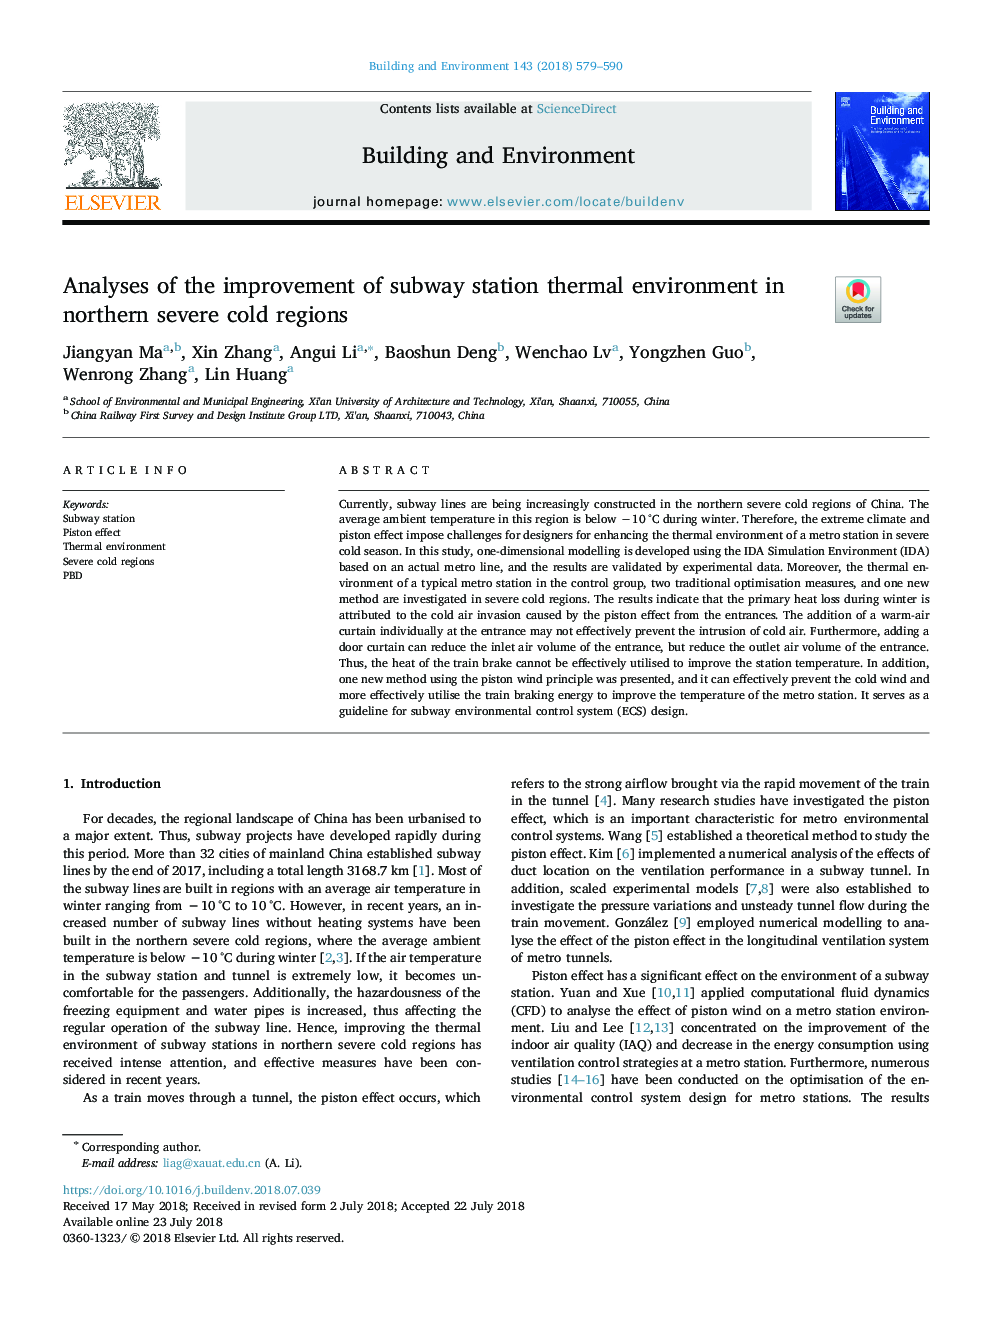 Analyses of the improvement of subway station thermal environment in northern severe cold regions